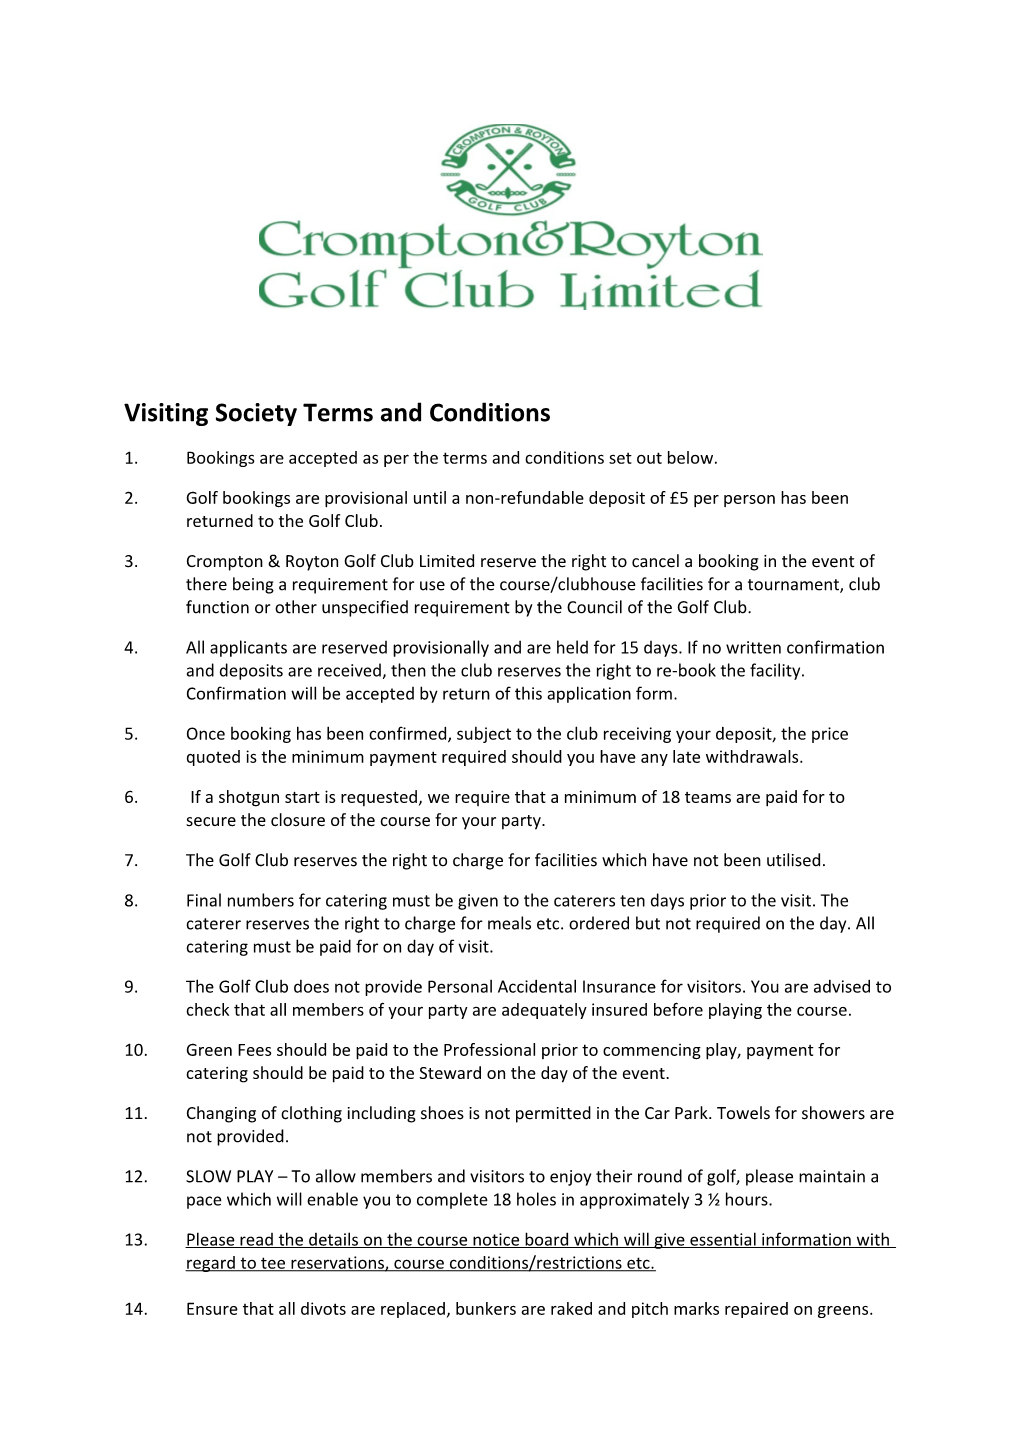 Visiting Society Terms and Conditions